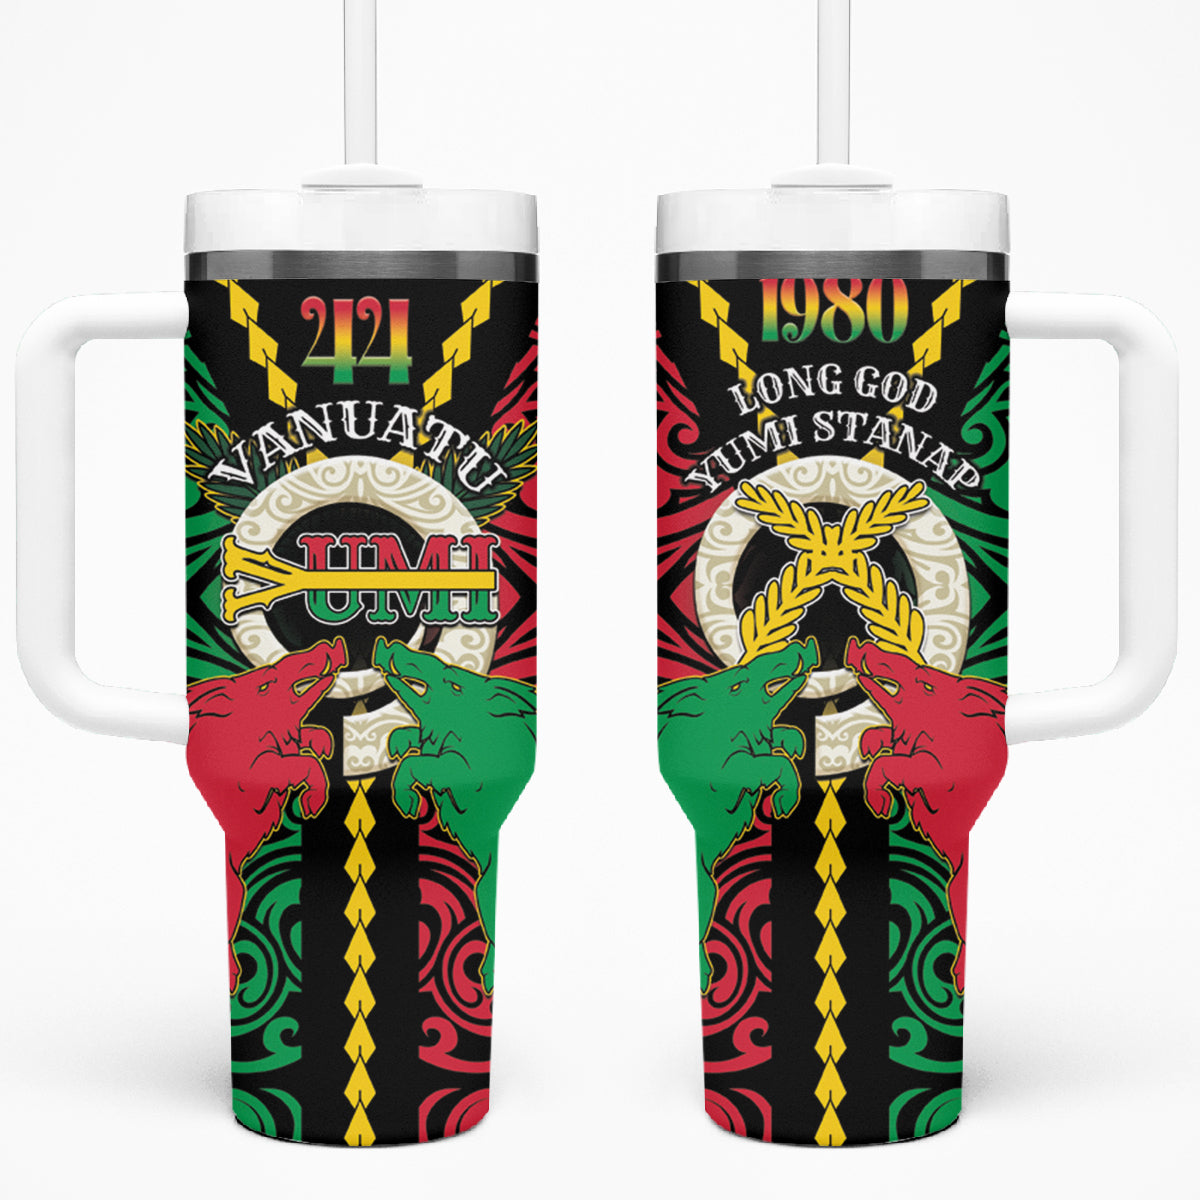 Vanuatu 44th Independence Day Tumbler With Handle Long God Yumi Stanap Wild Boar